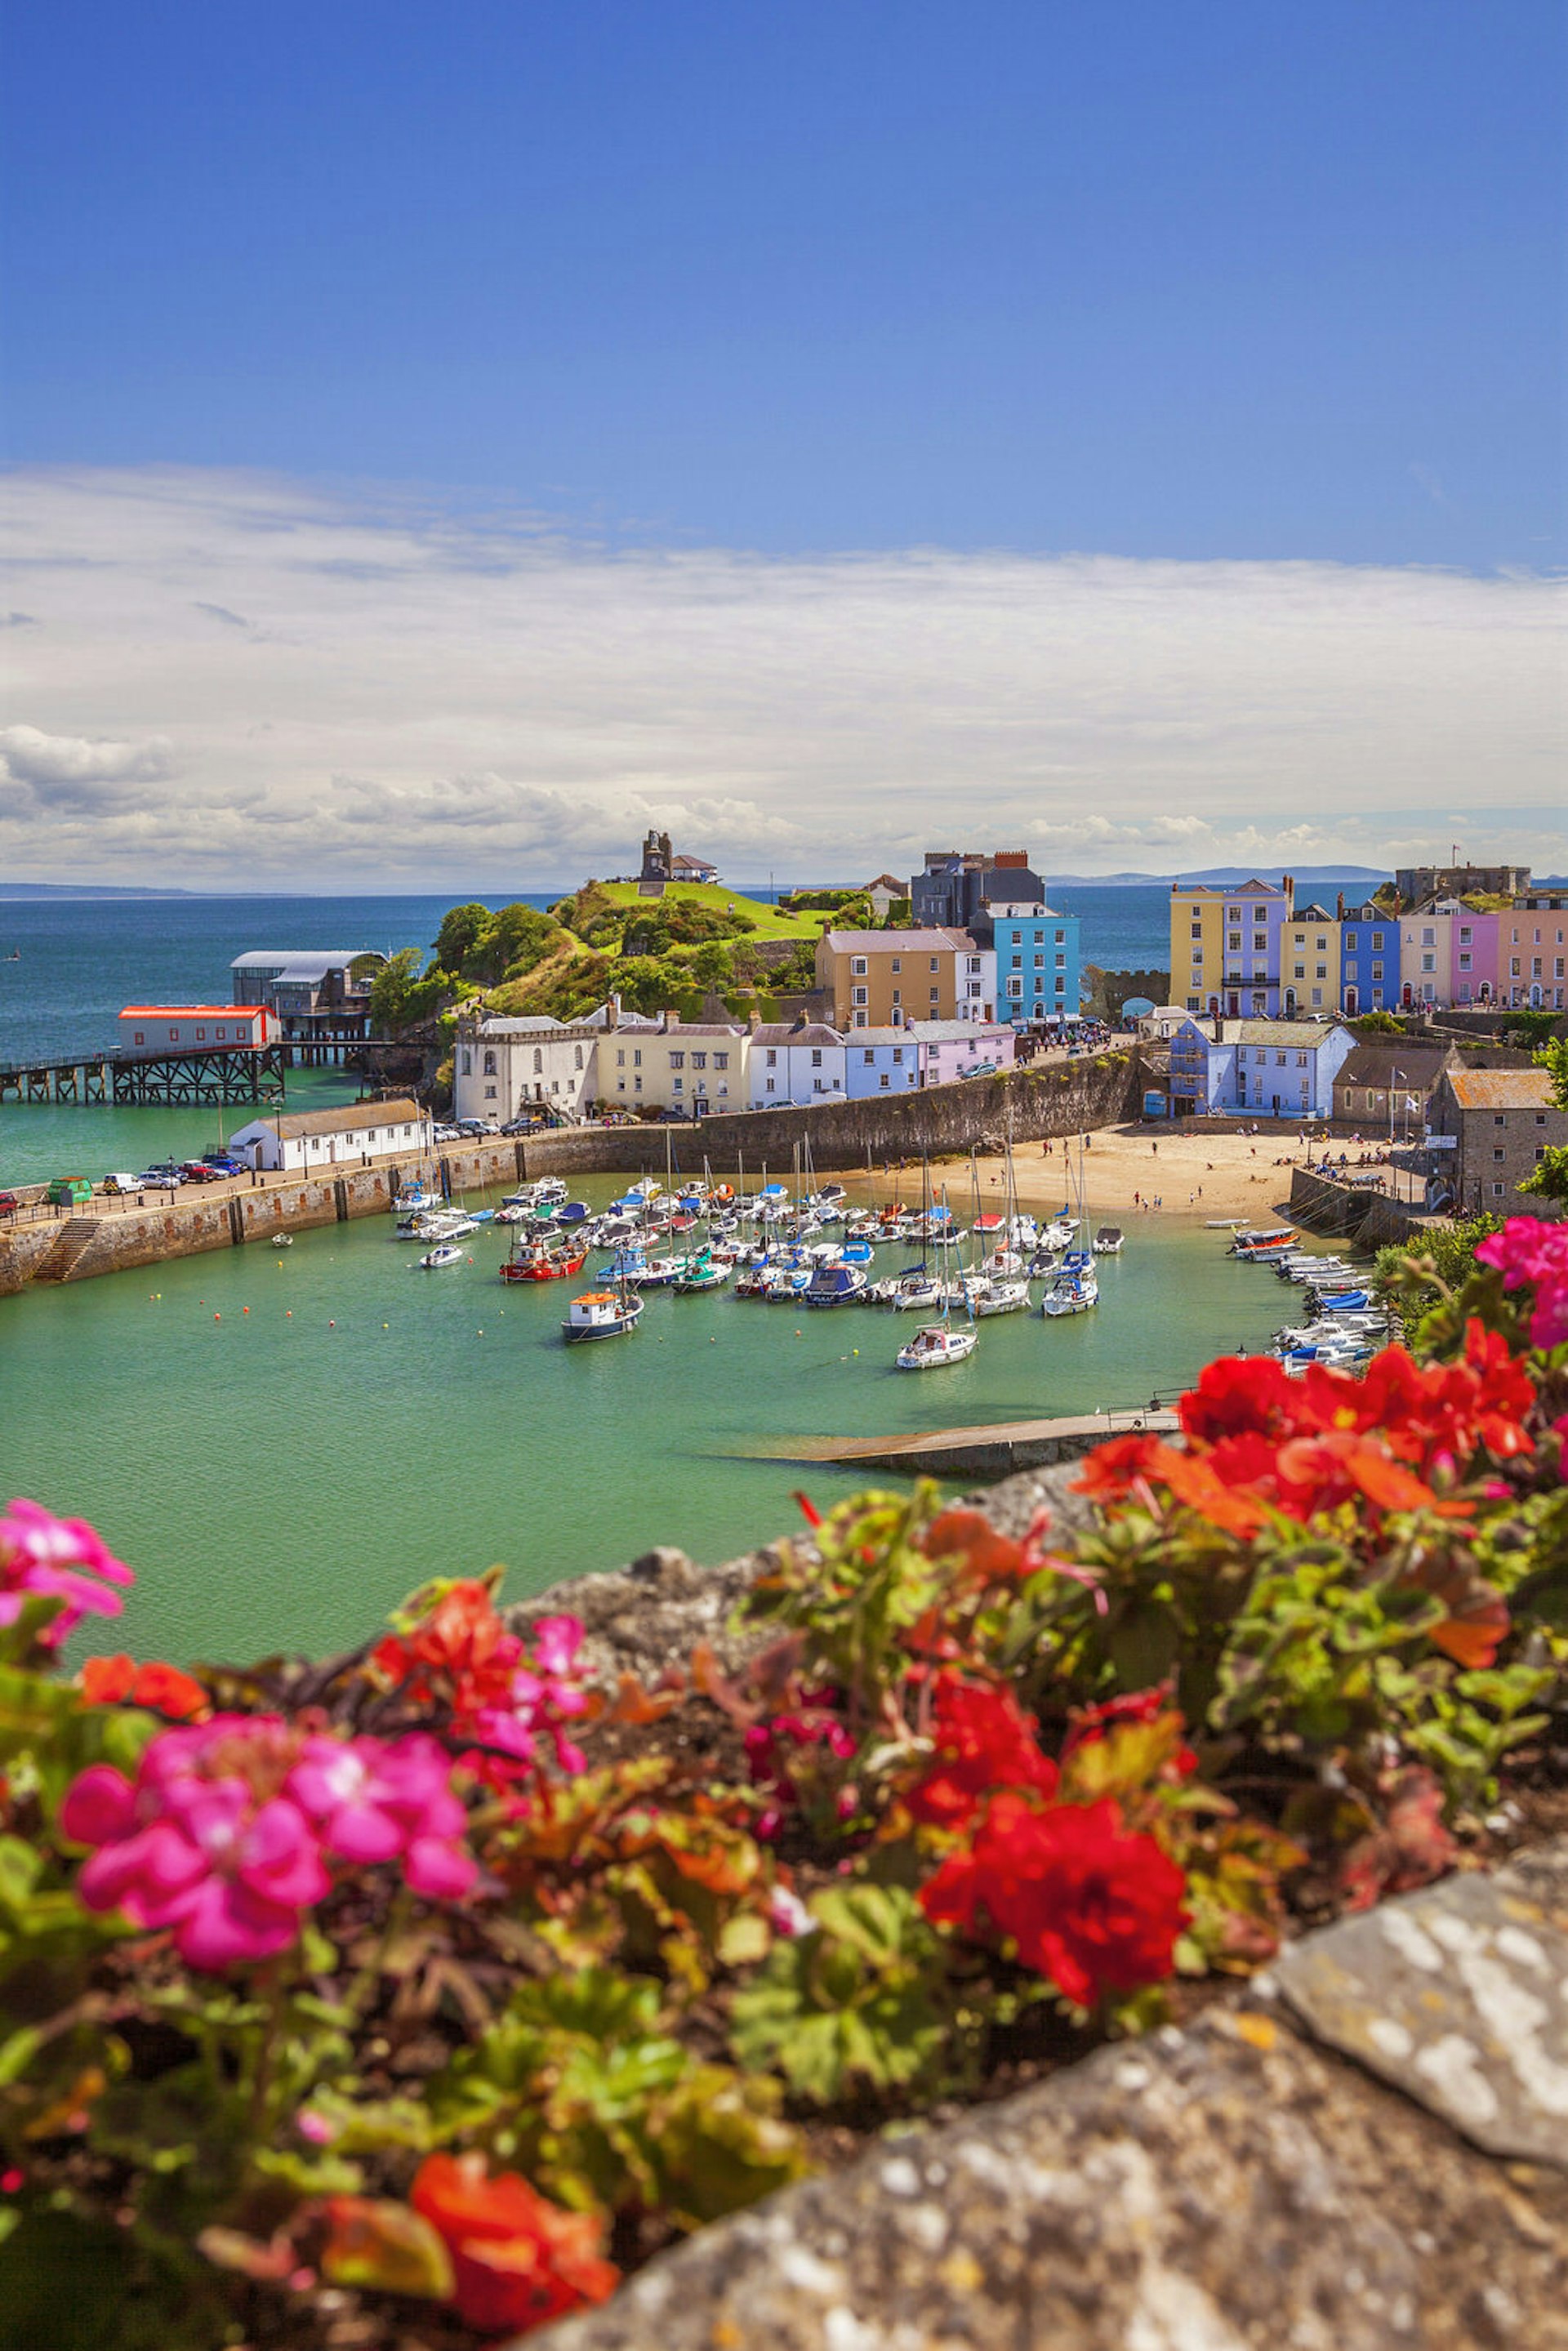 Bright flowers overlook the idyllic harbour and pastel houses of Tenby, in Pembrokeshire © Billy Stock / Shutterstock